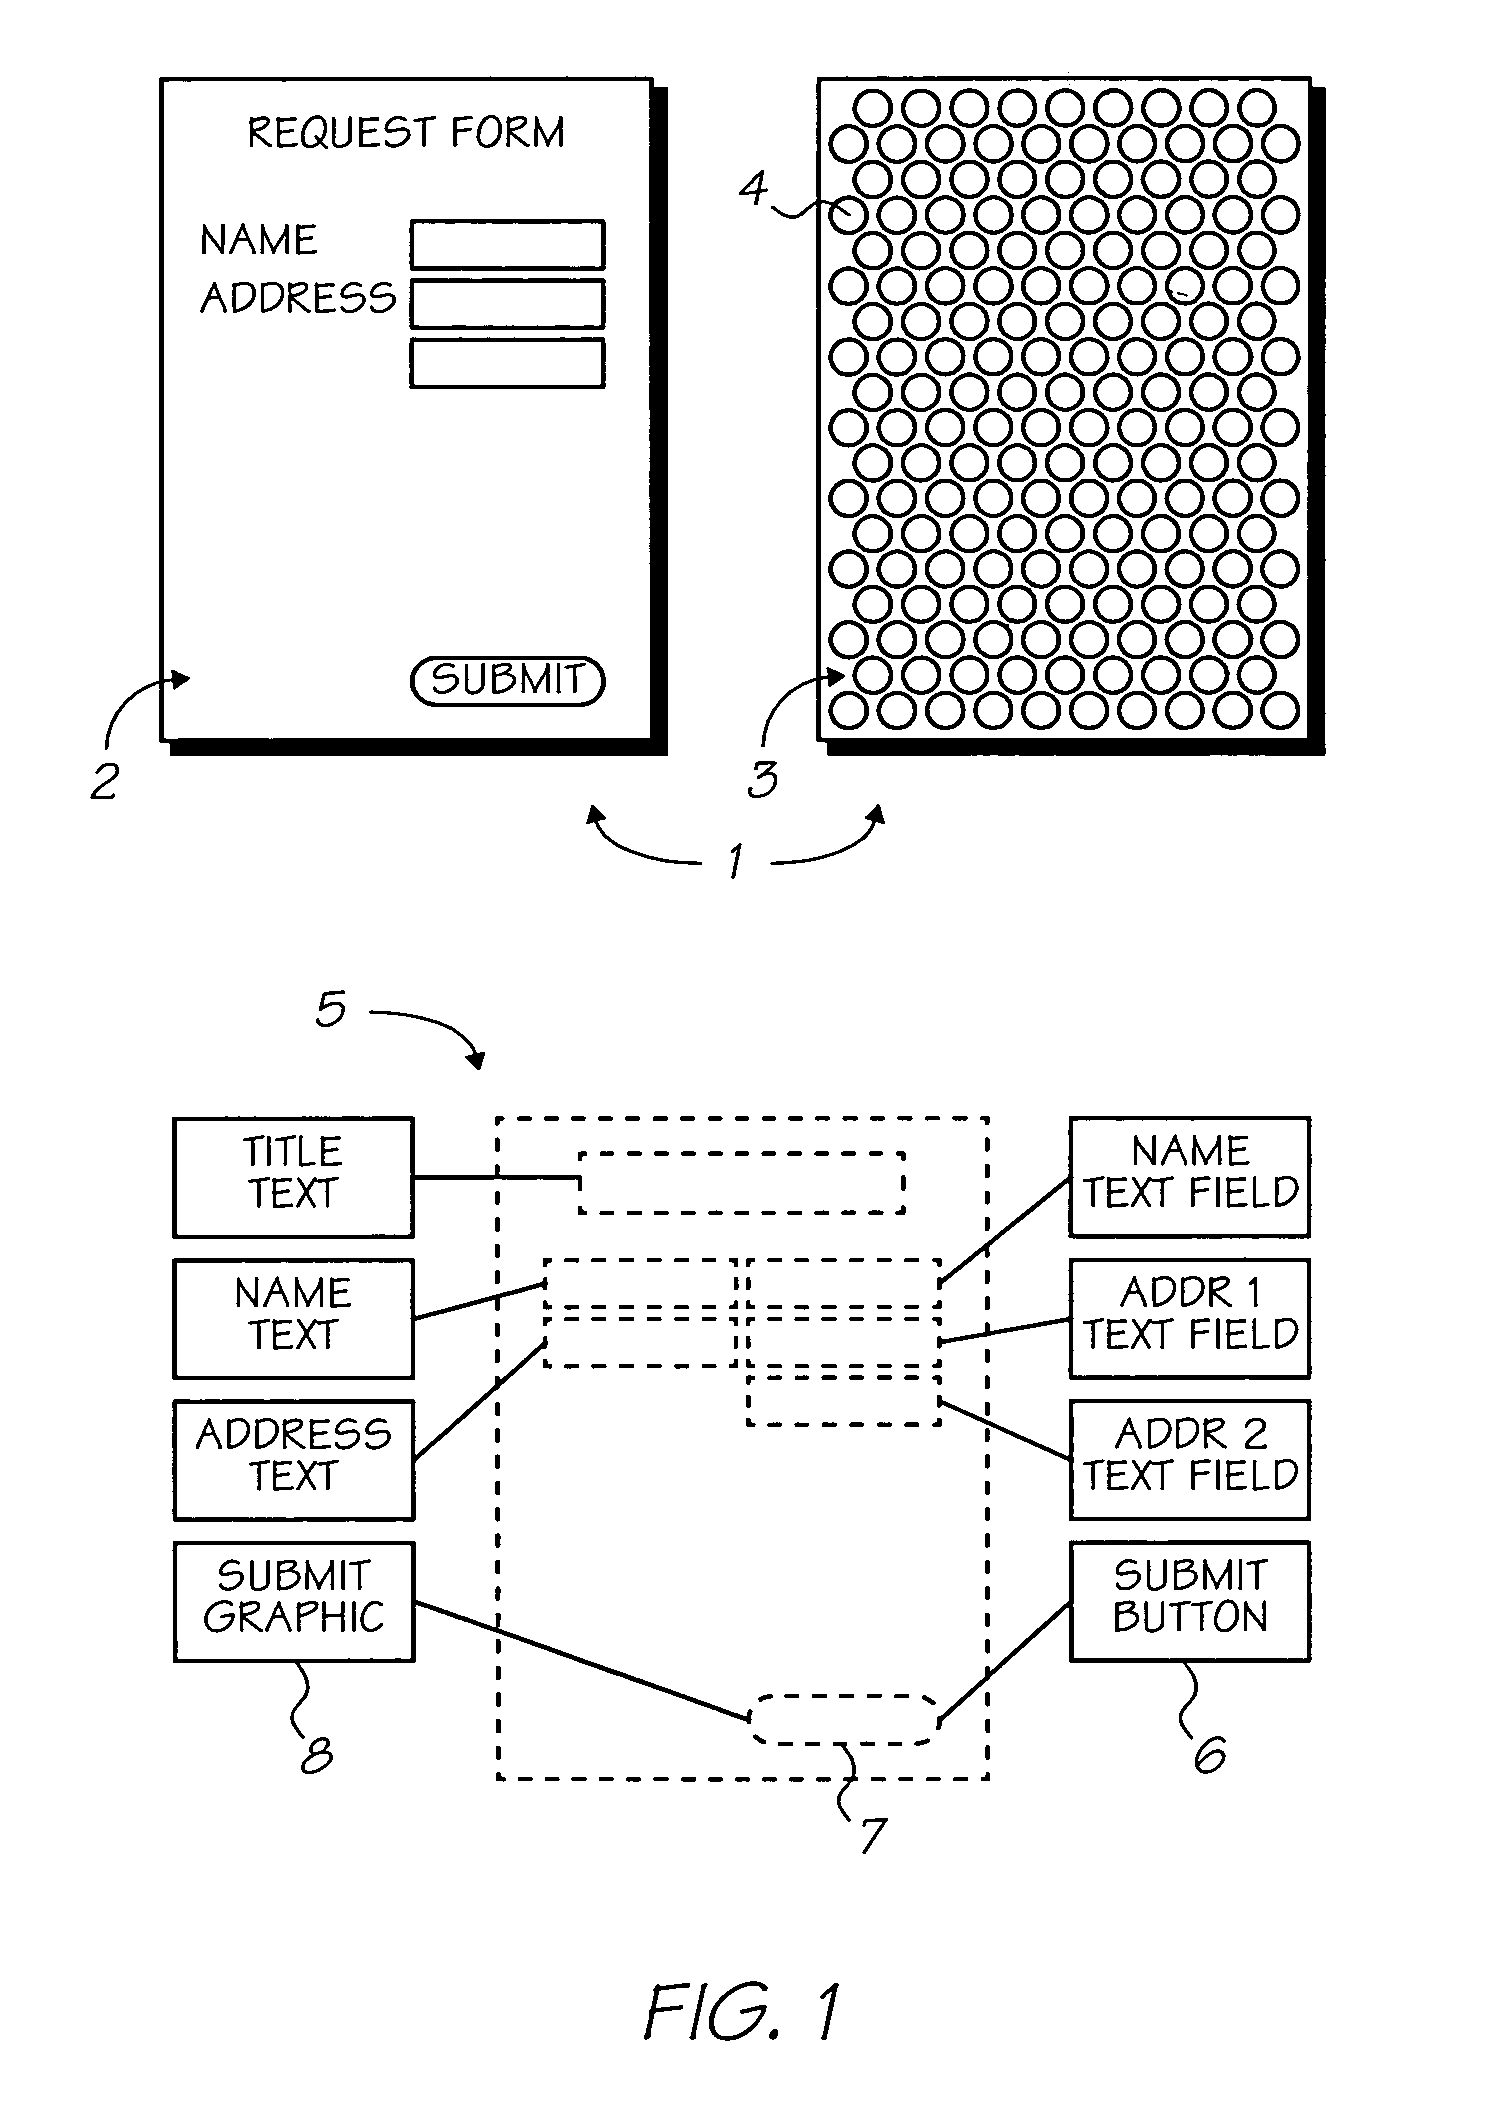 Apparatus for interaction with a network computer system